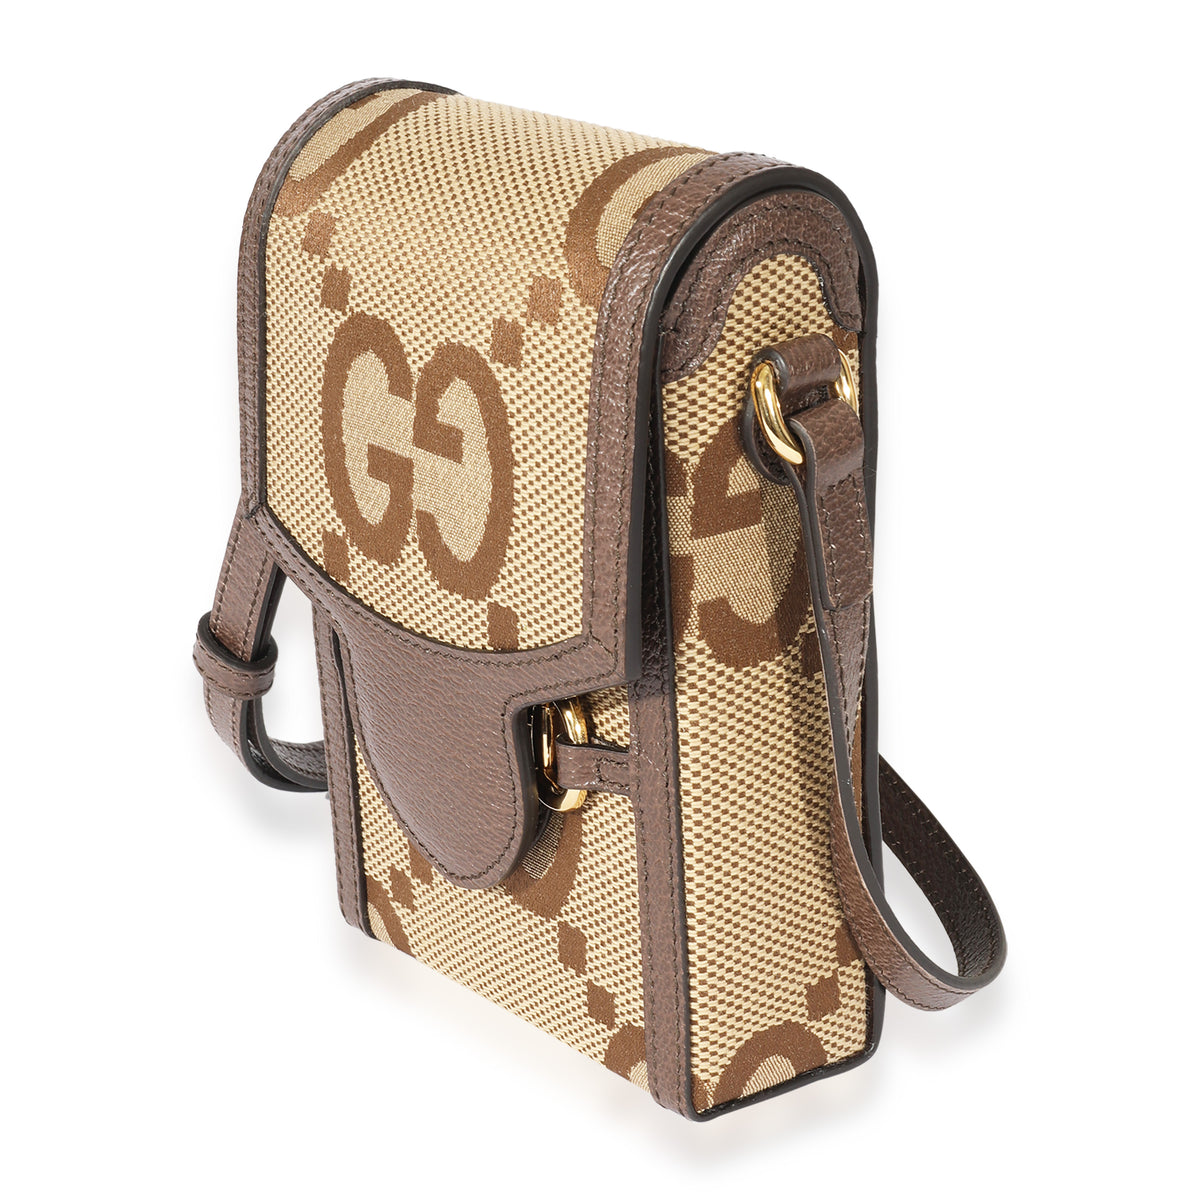 Jumbo GG tote bag in camel and ebony GG Canvas